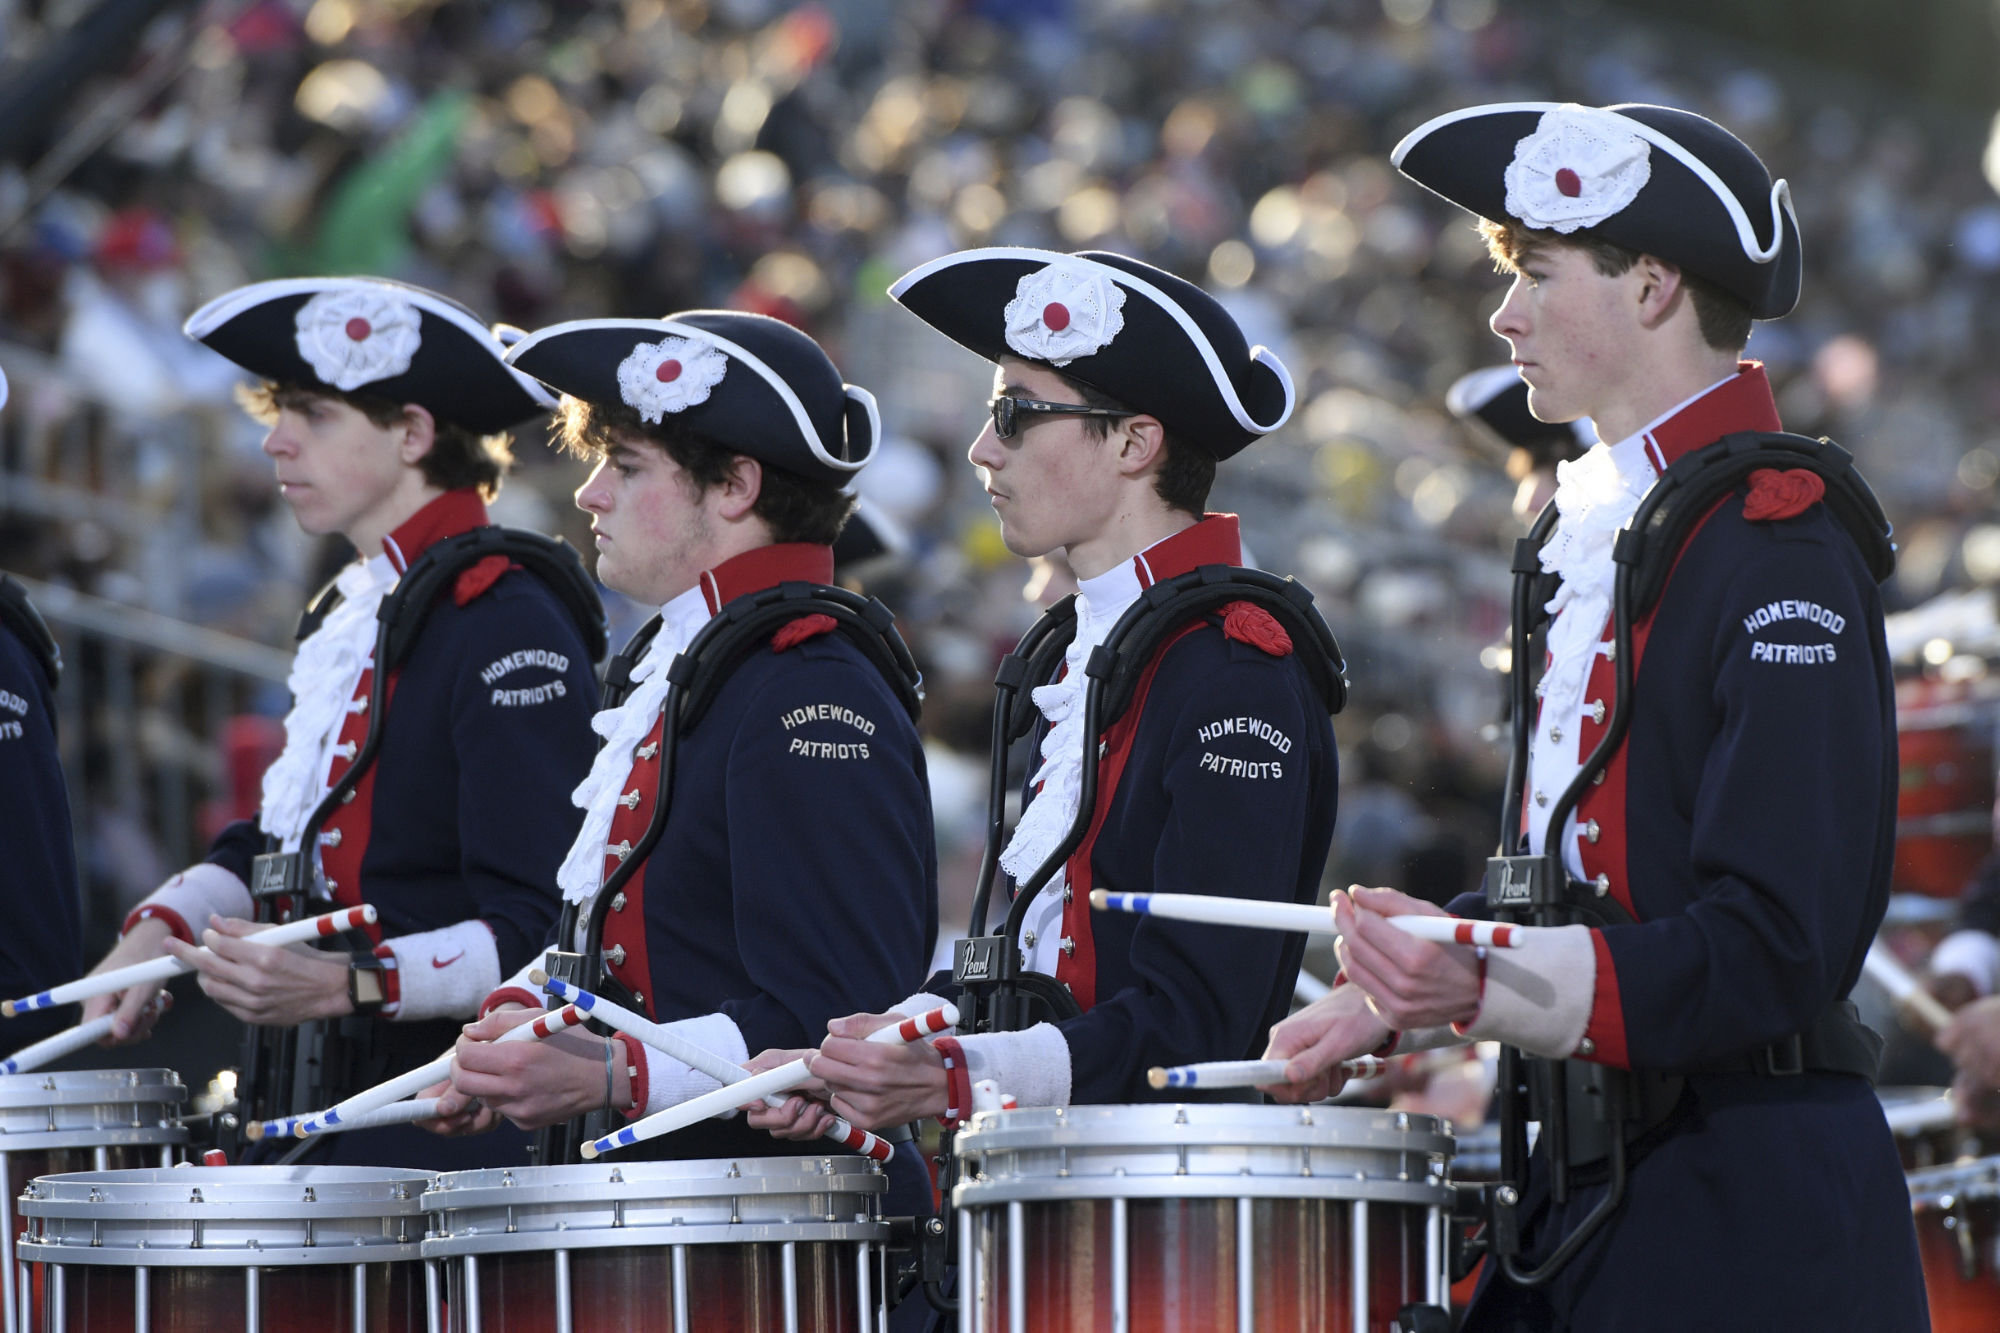 Members of the Homewood High School Patriot Band from Homewood, Ala., perform during the 133rd Rose Parade in Pasadena, Calif., on Saturday, Jan. 1, 2022. Members of the band have tested positive for COVID-19 since returning home, and the entire school switched to virtual classes because of an outbreak. (AP Photo/Michael Owen Baker, File)